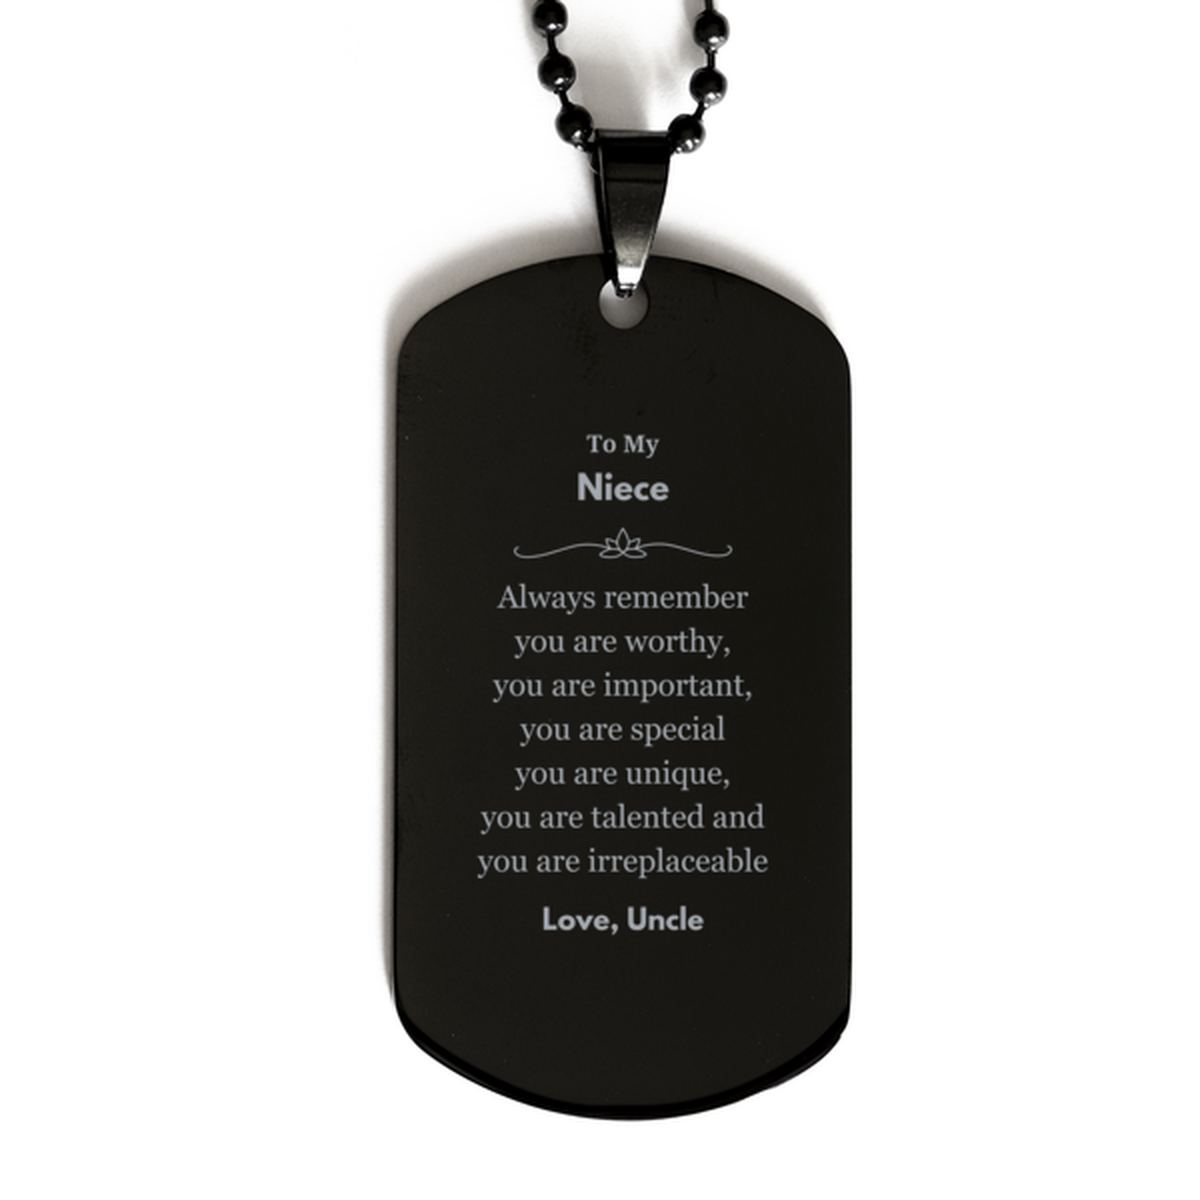 Niece Birthday Gifts from Uncle, Inspirational Black Dog Tag for Niece Christmas Graduation Gifts for Niece Always remember you are worthy, you are important. Love, Uncle